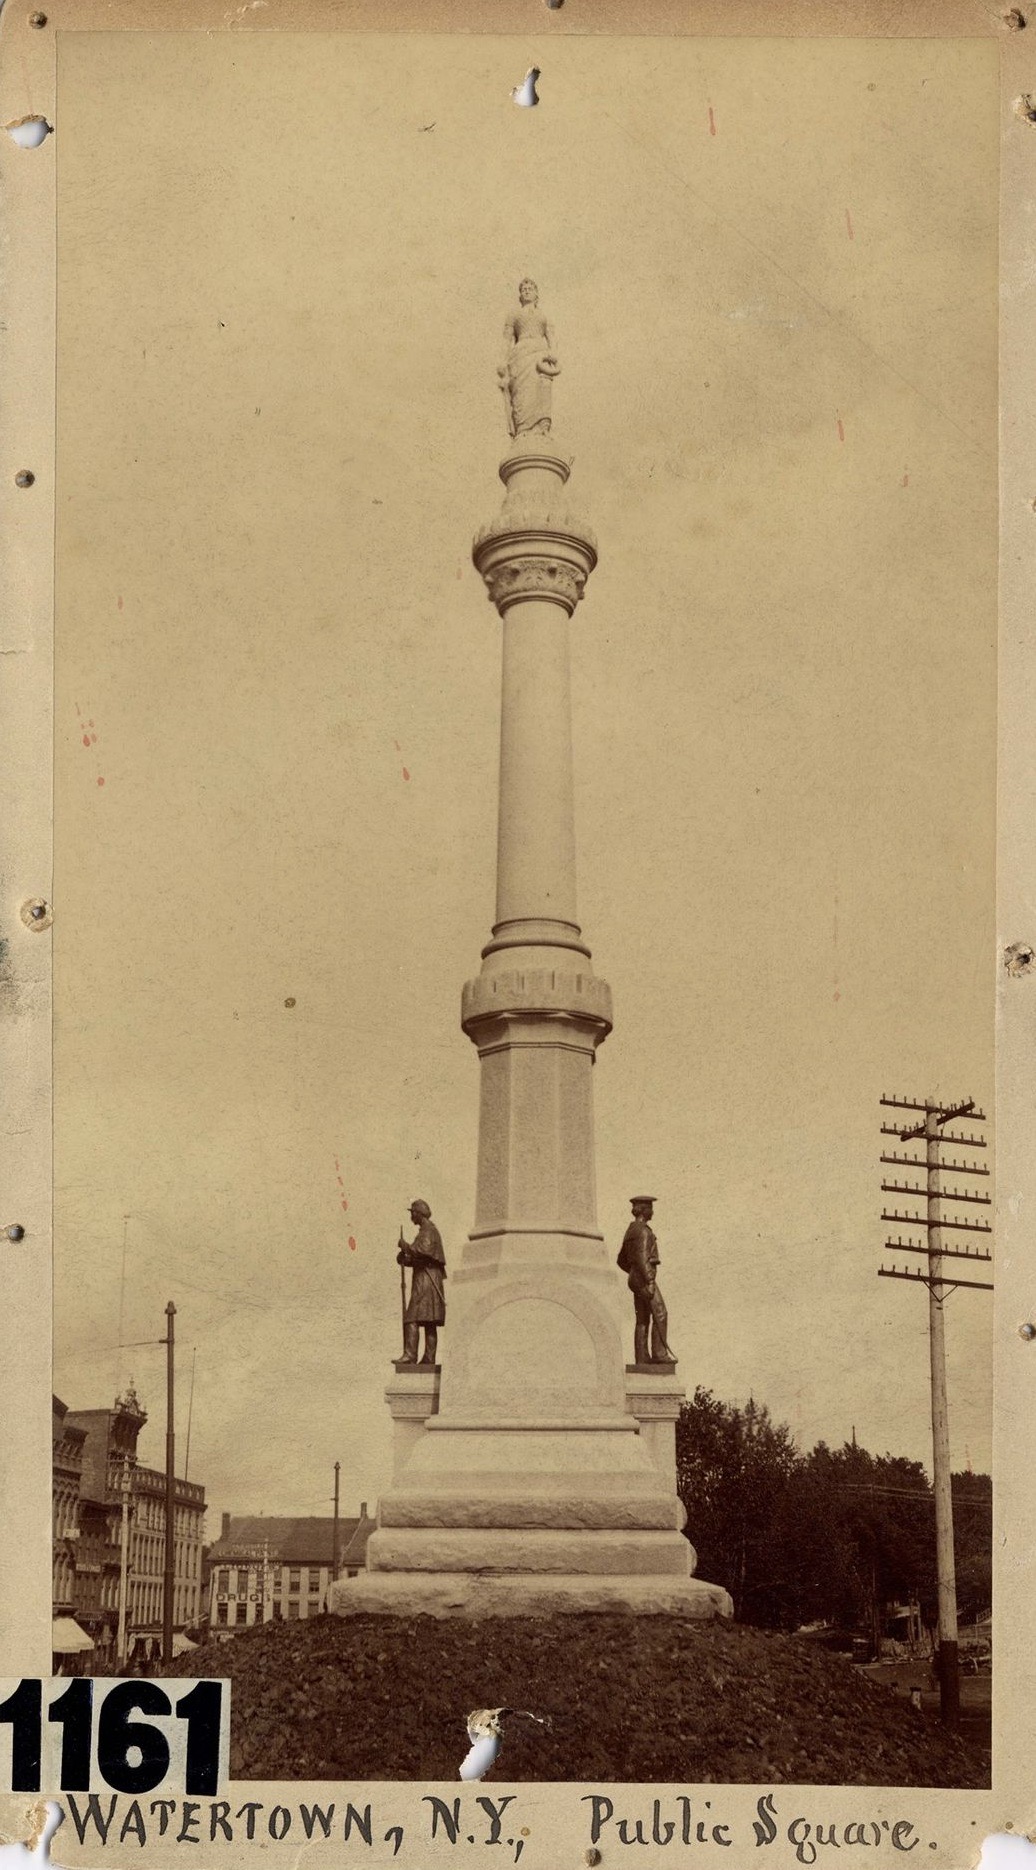 Soldiers' and Sailors' monument